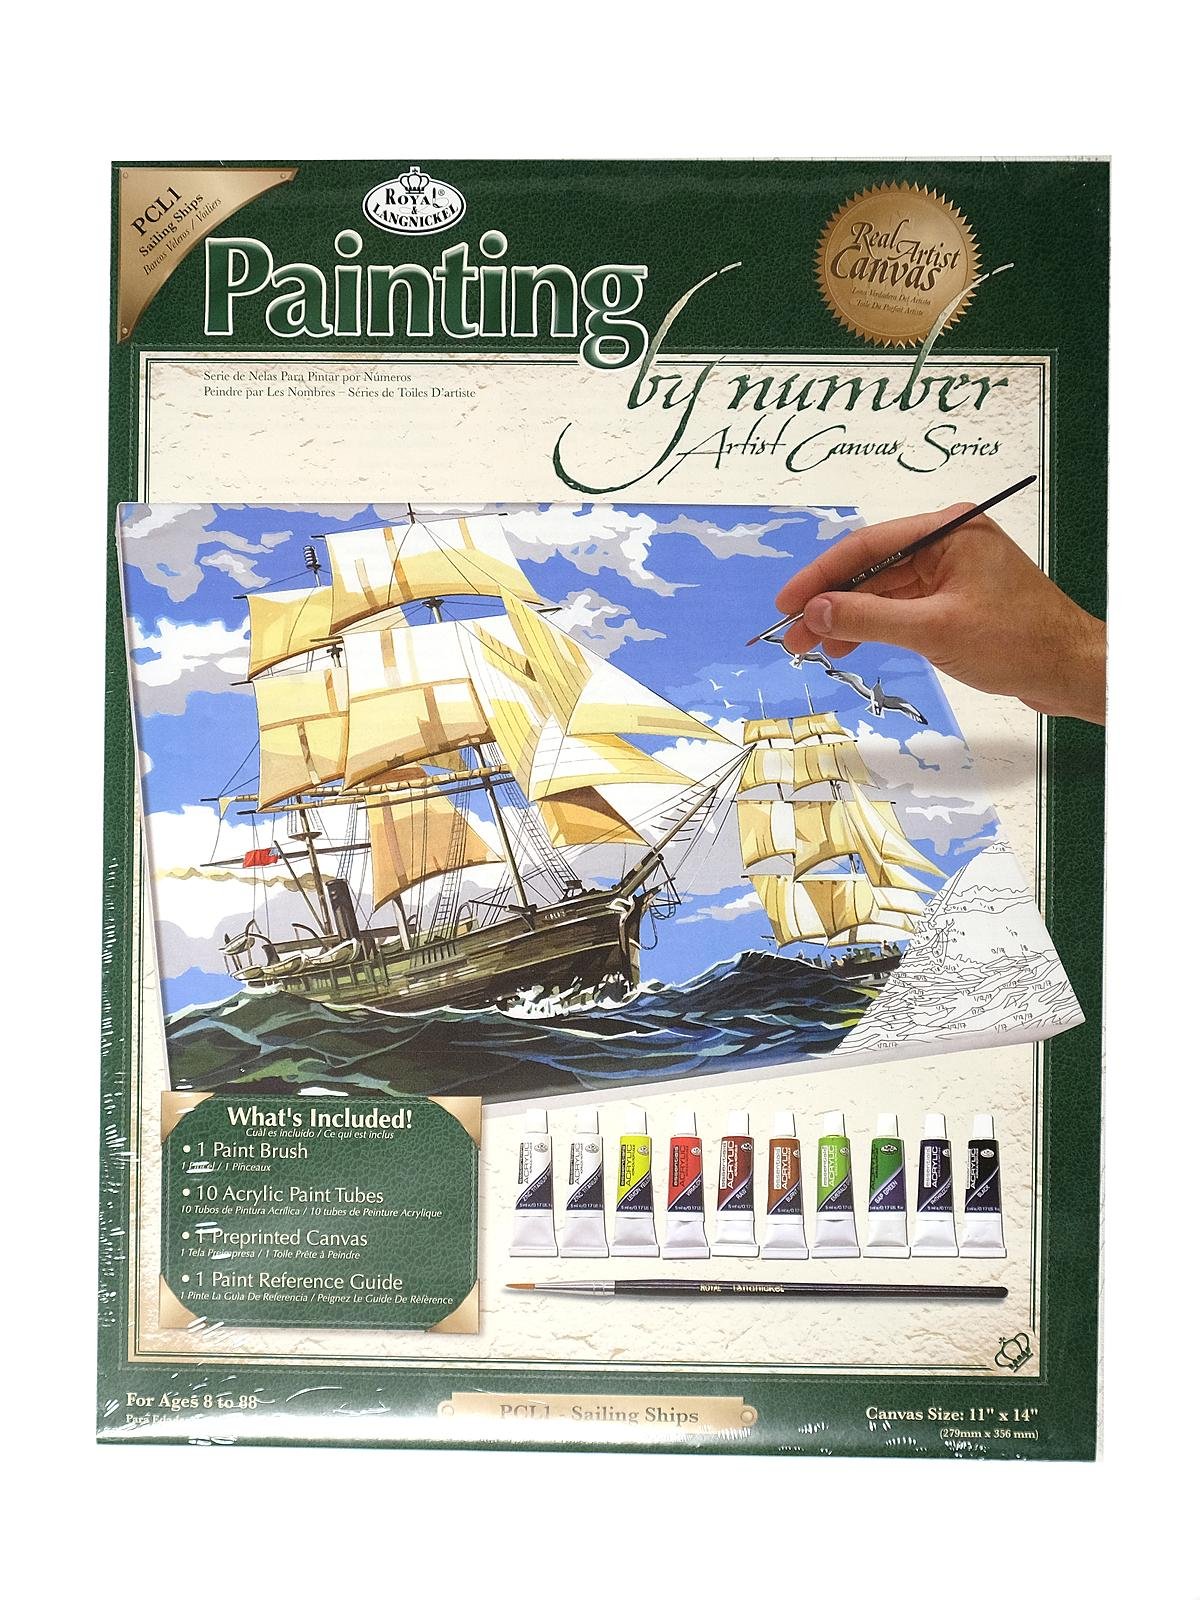 Large size Paint by Numbers Canvas for Adults